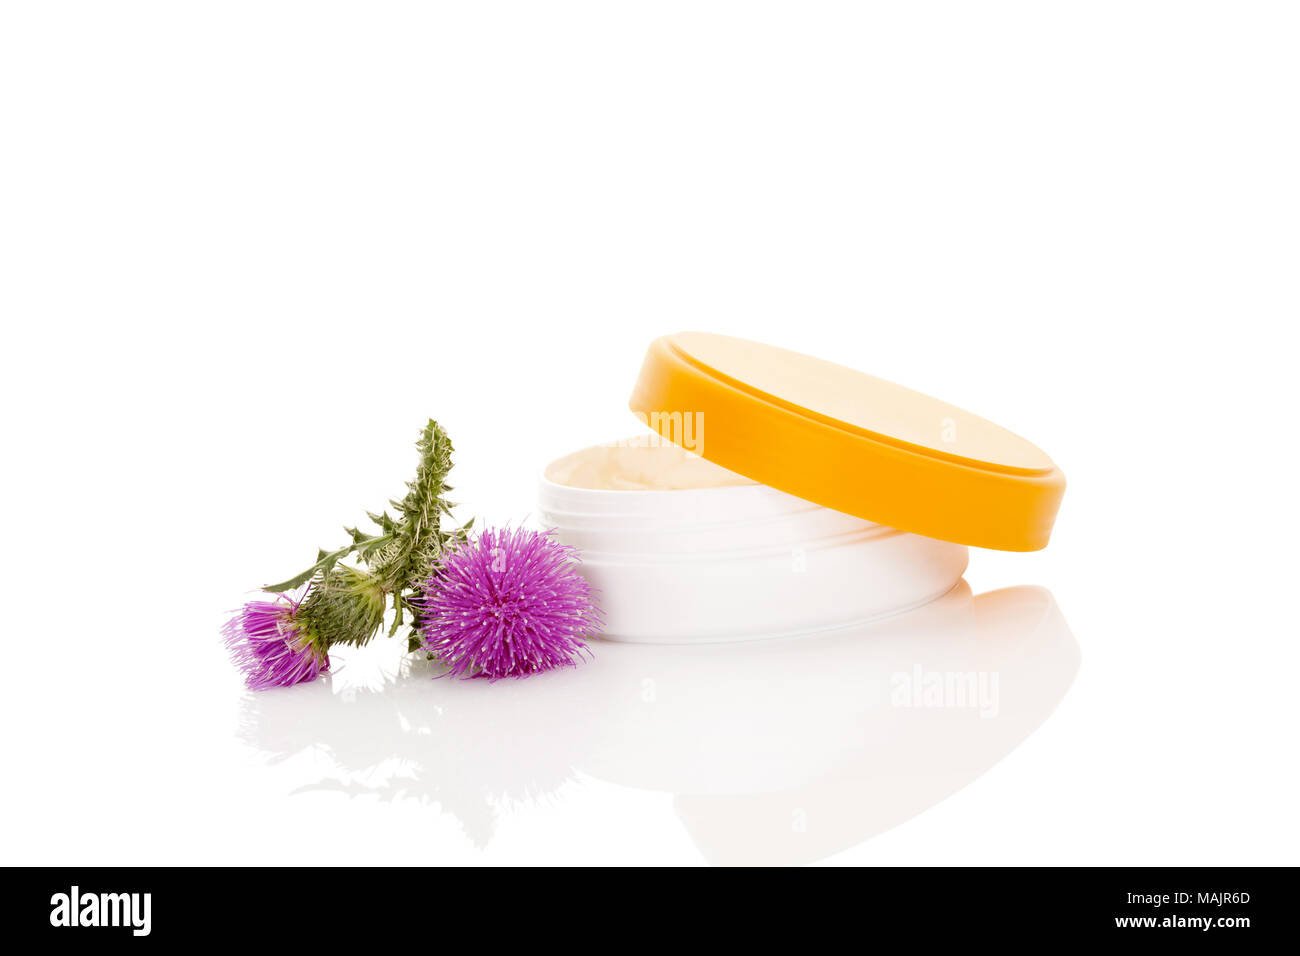 Carduus flower creme with flowers isolated on white background. Medicinal plant. Natural cosmetics. Stock Photo